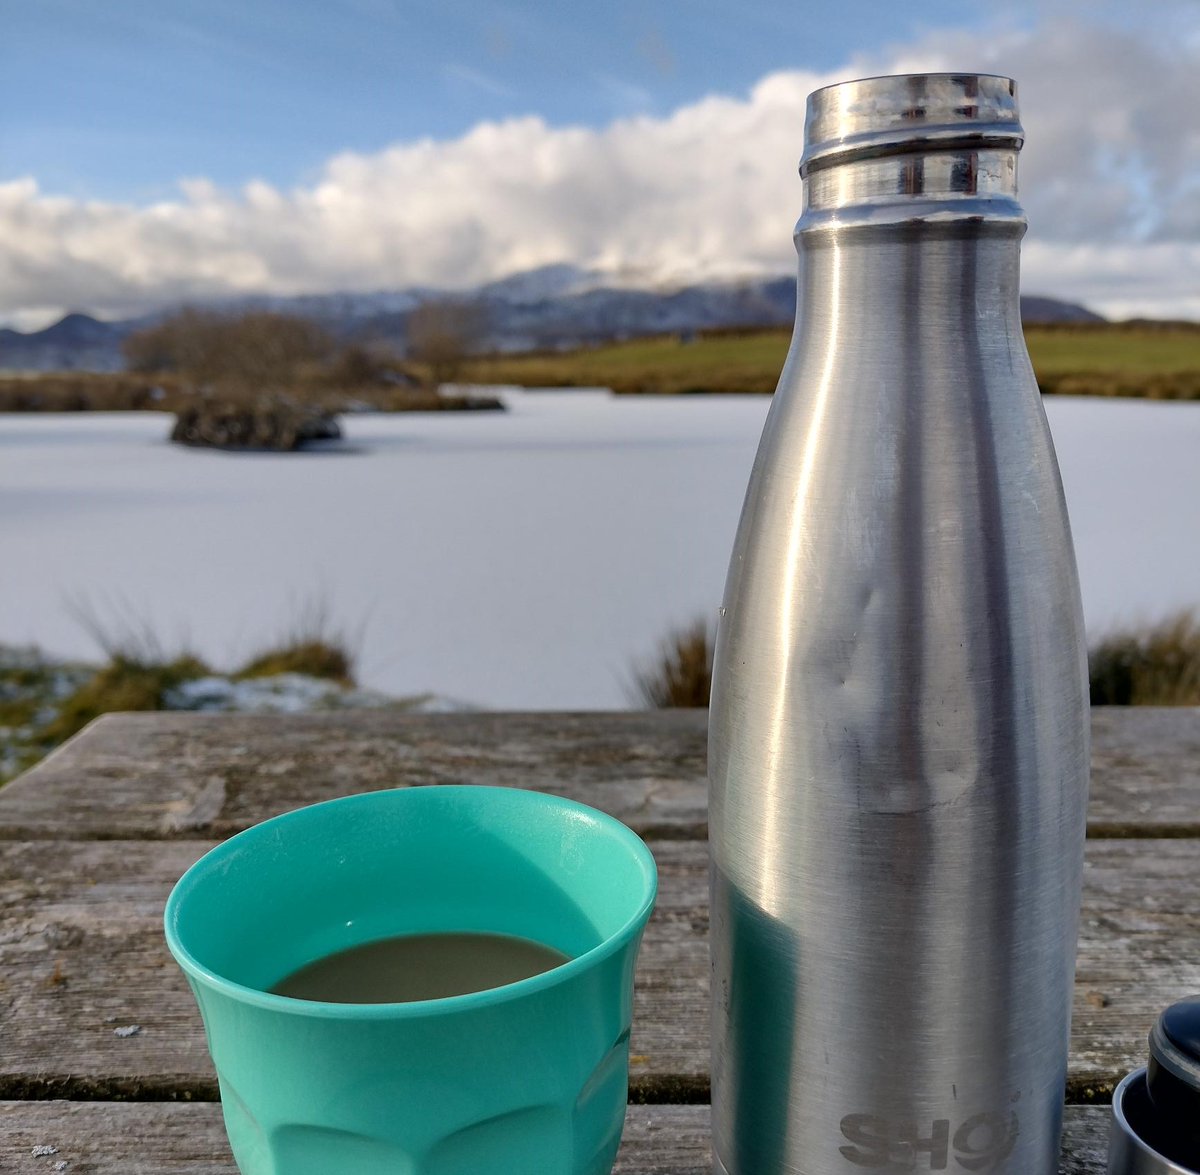 It's officially time for a brew. Today is National Tea Day & what better excuse to pack your flask if you're out on a recce of your NPMS square this weekend. Our flask is pretty battered but we're always cheered by a good cuppa out in the field. Tea ✅Biscuits ✅ Raincoat ✅ 🍵